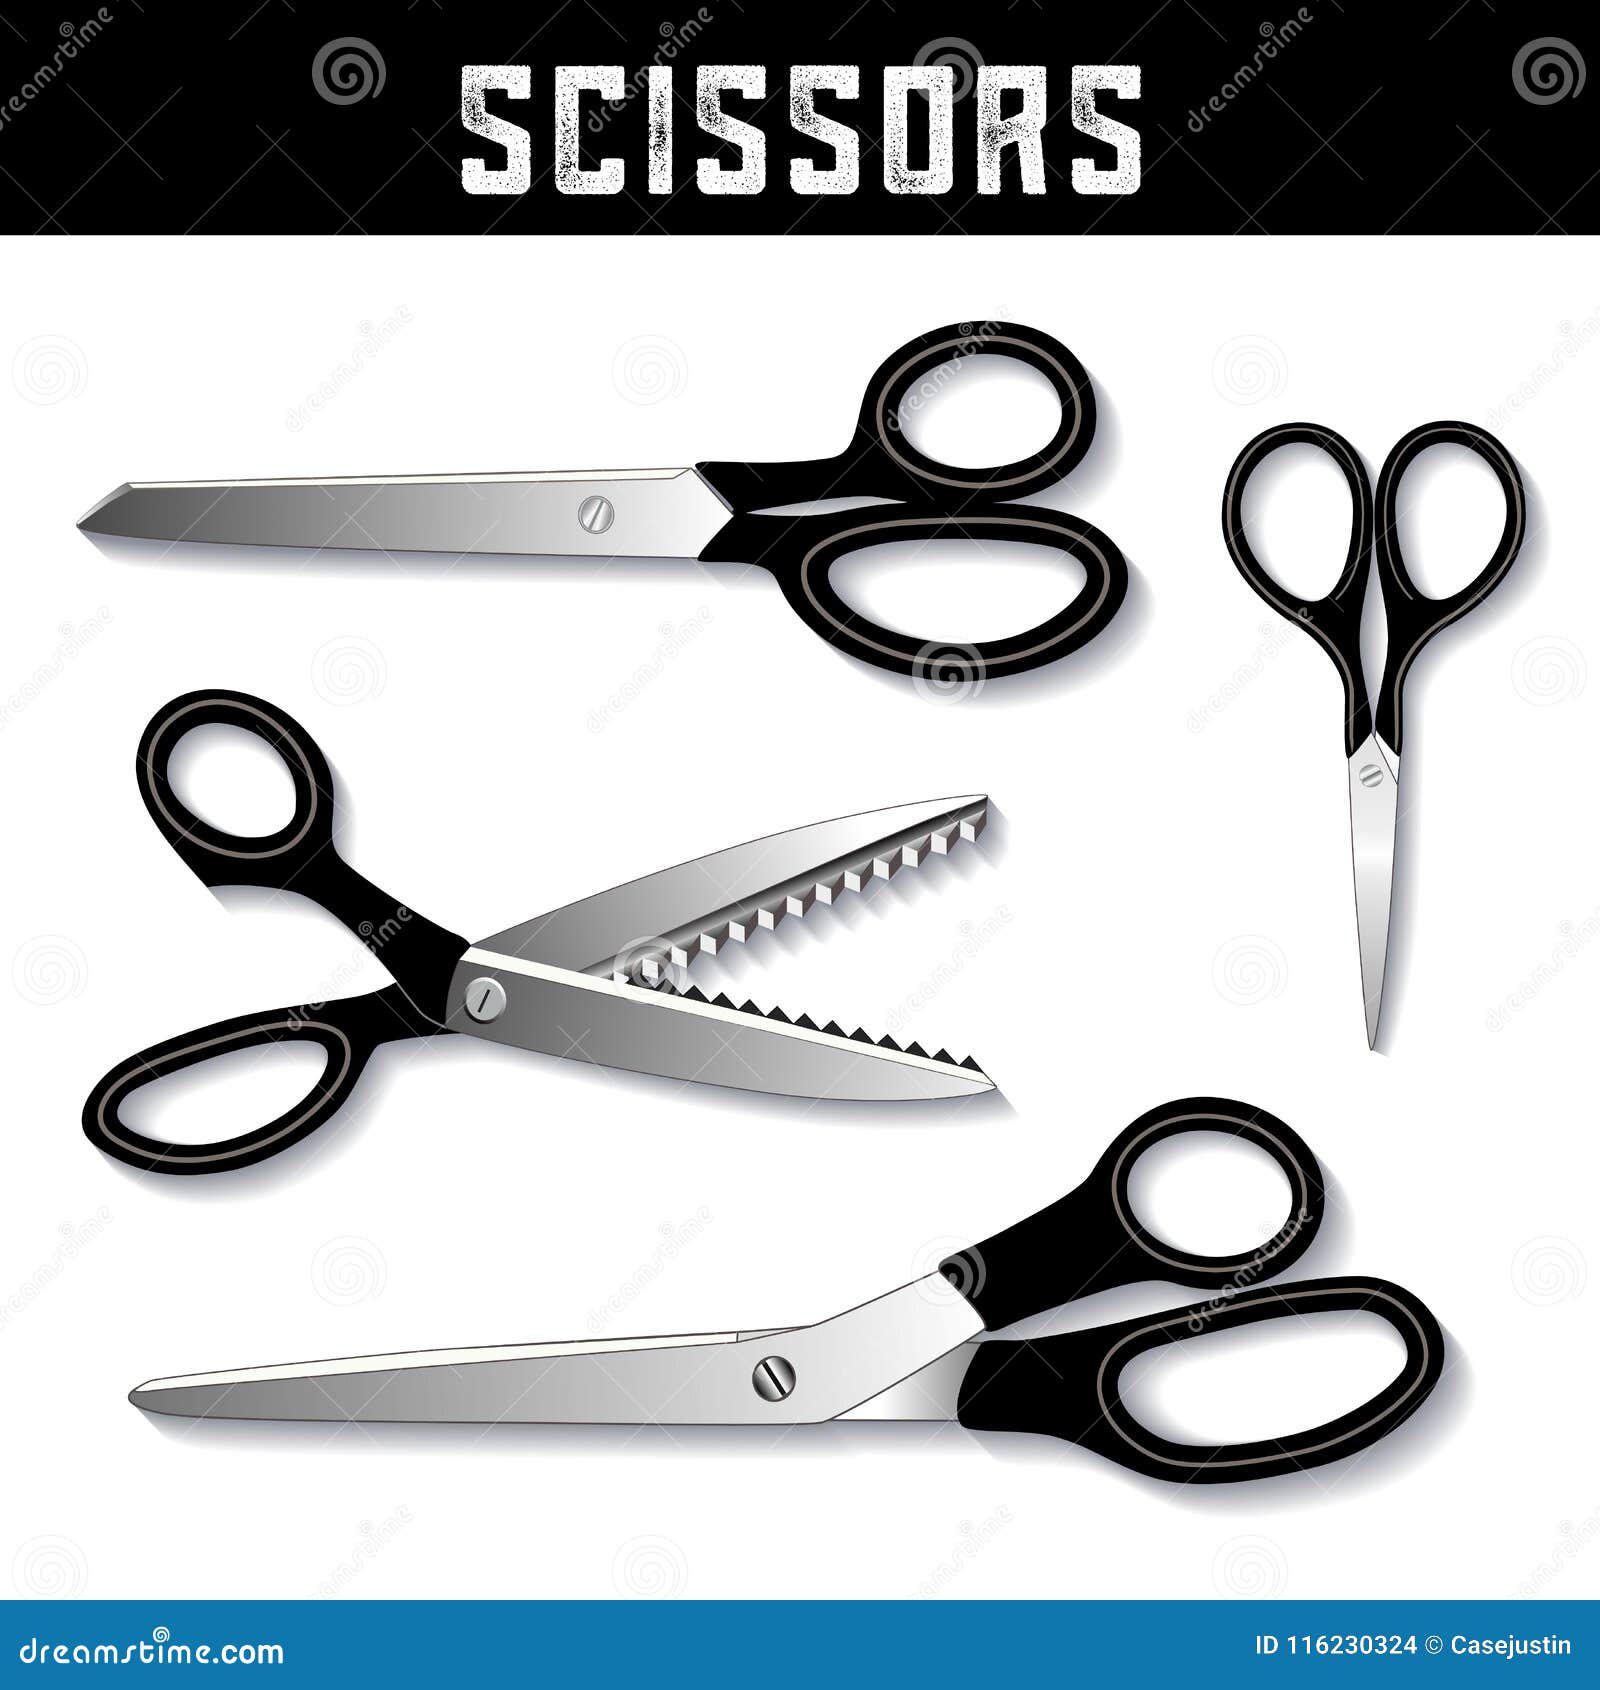 https://thumbs.dreamstime.com/z/scissors-collection-embroidery-dressmaker-standard-pinking-shears-sewing-tailoring-needlework-quilting-crafts-business-do-116230324.jpg